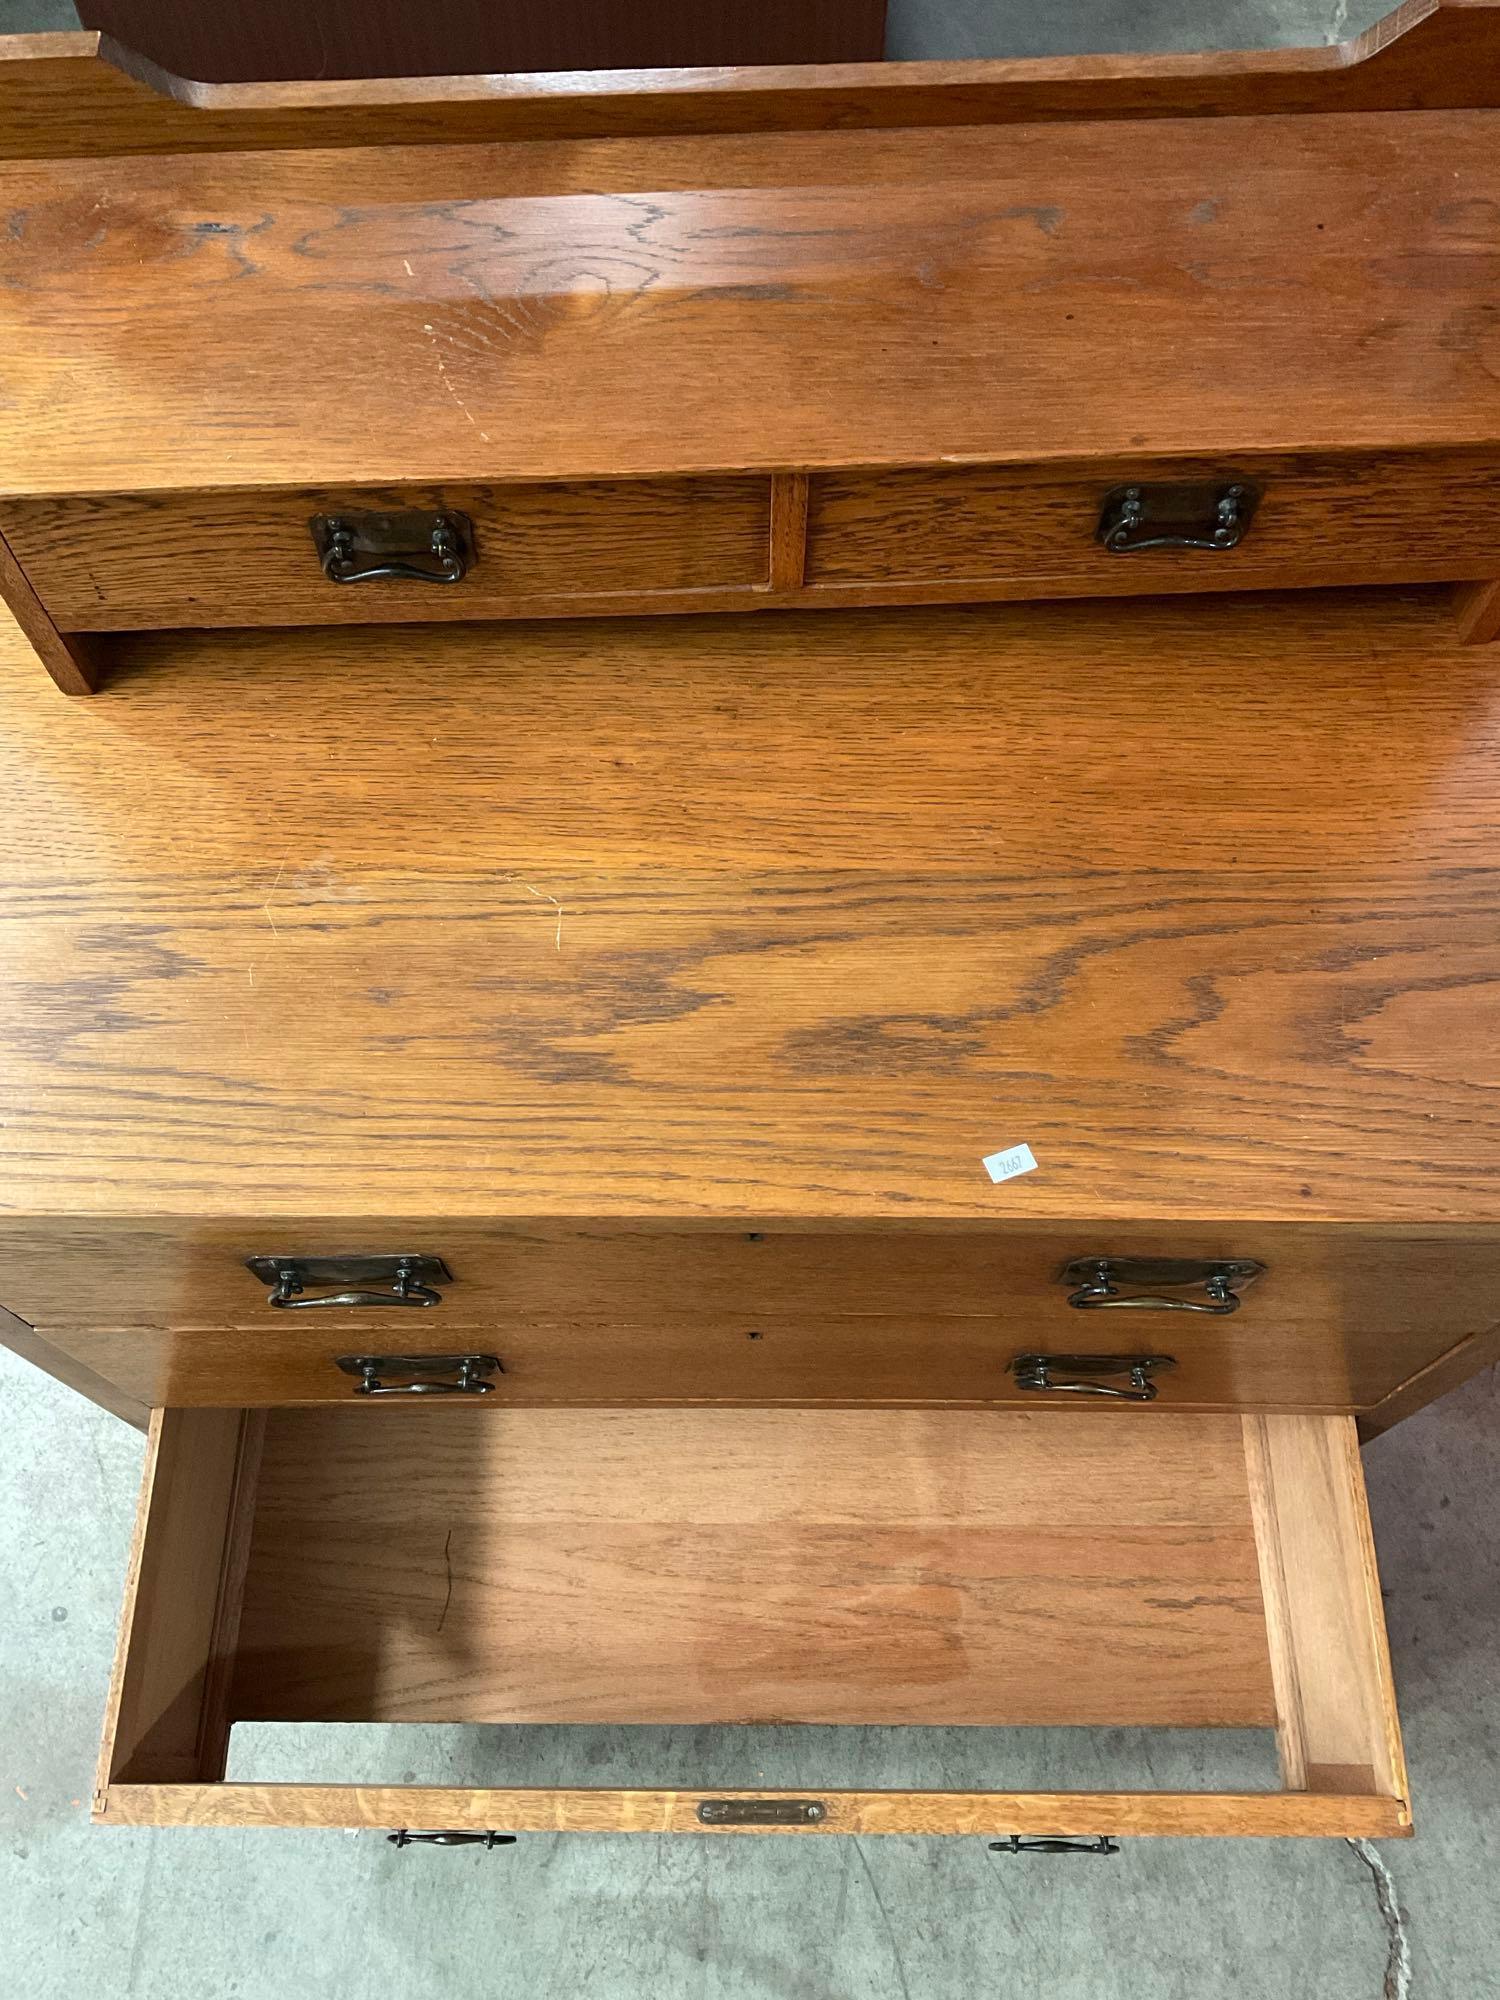 Antique Wooden Vanity w/ Revolving Mirror, 5 Drawers & Unique Sailing Ship Cut Outs. See pics.